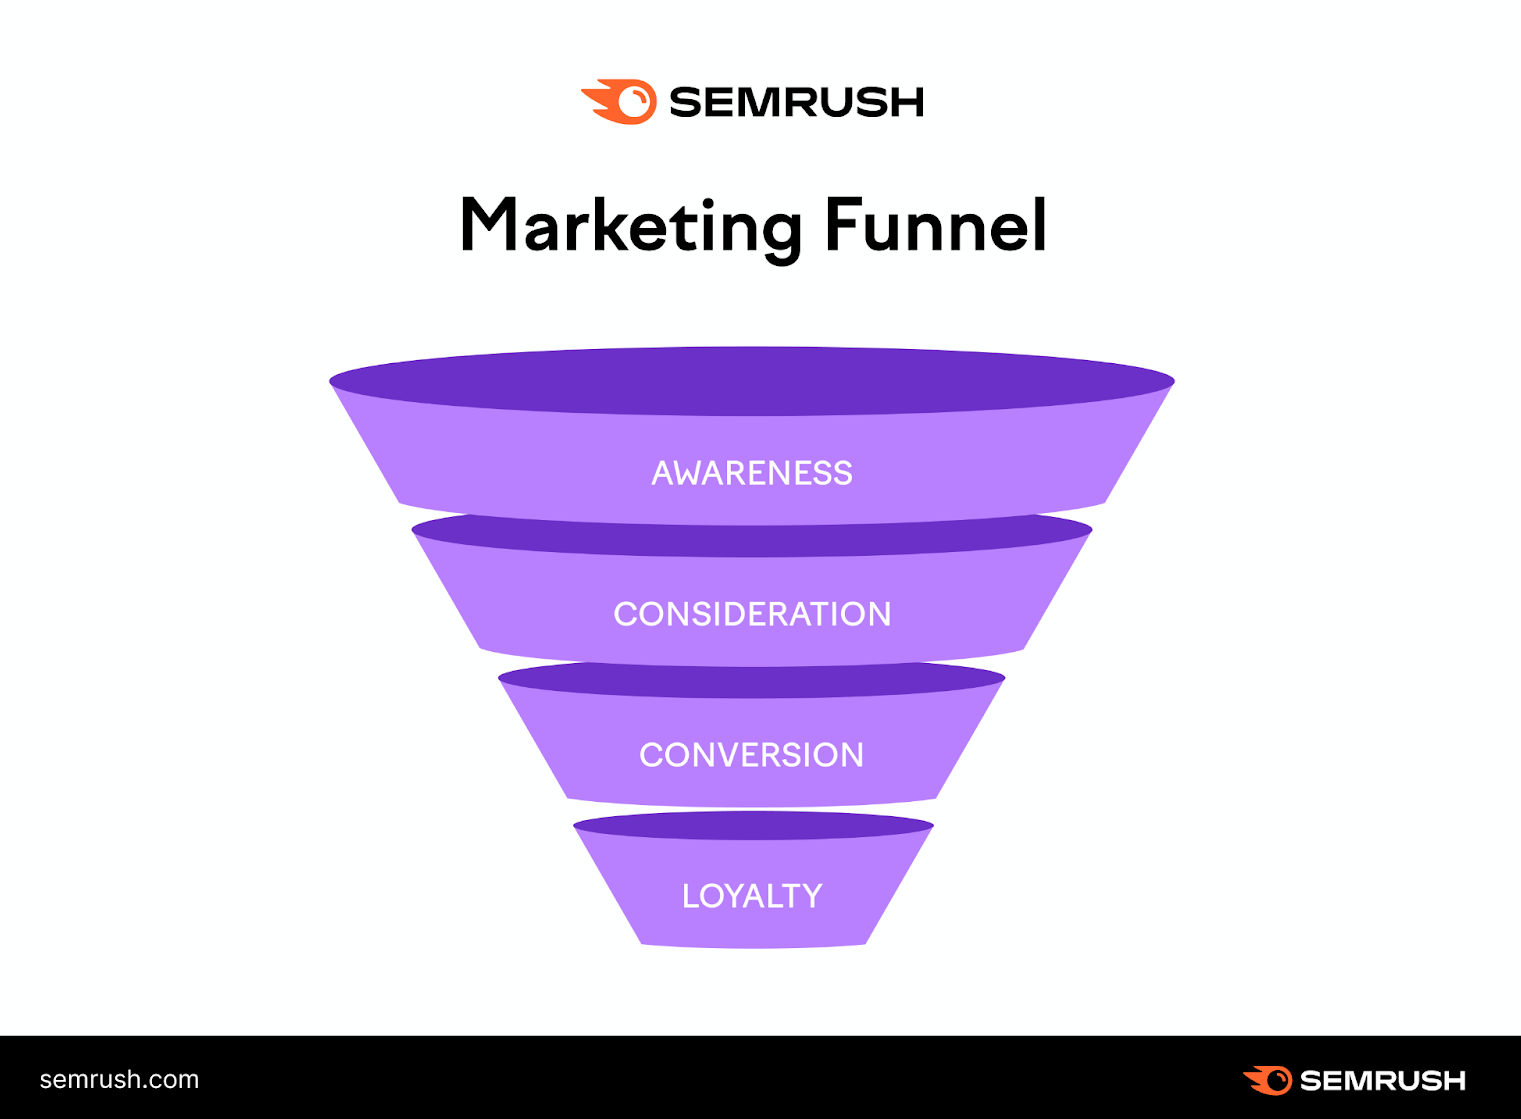 A marketing funnel, including "awareness," "consideration," "conversion," and "loyalty" stages